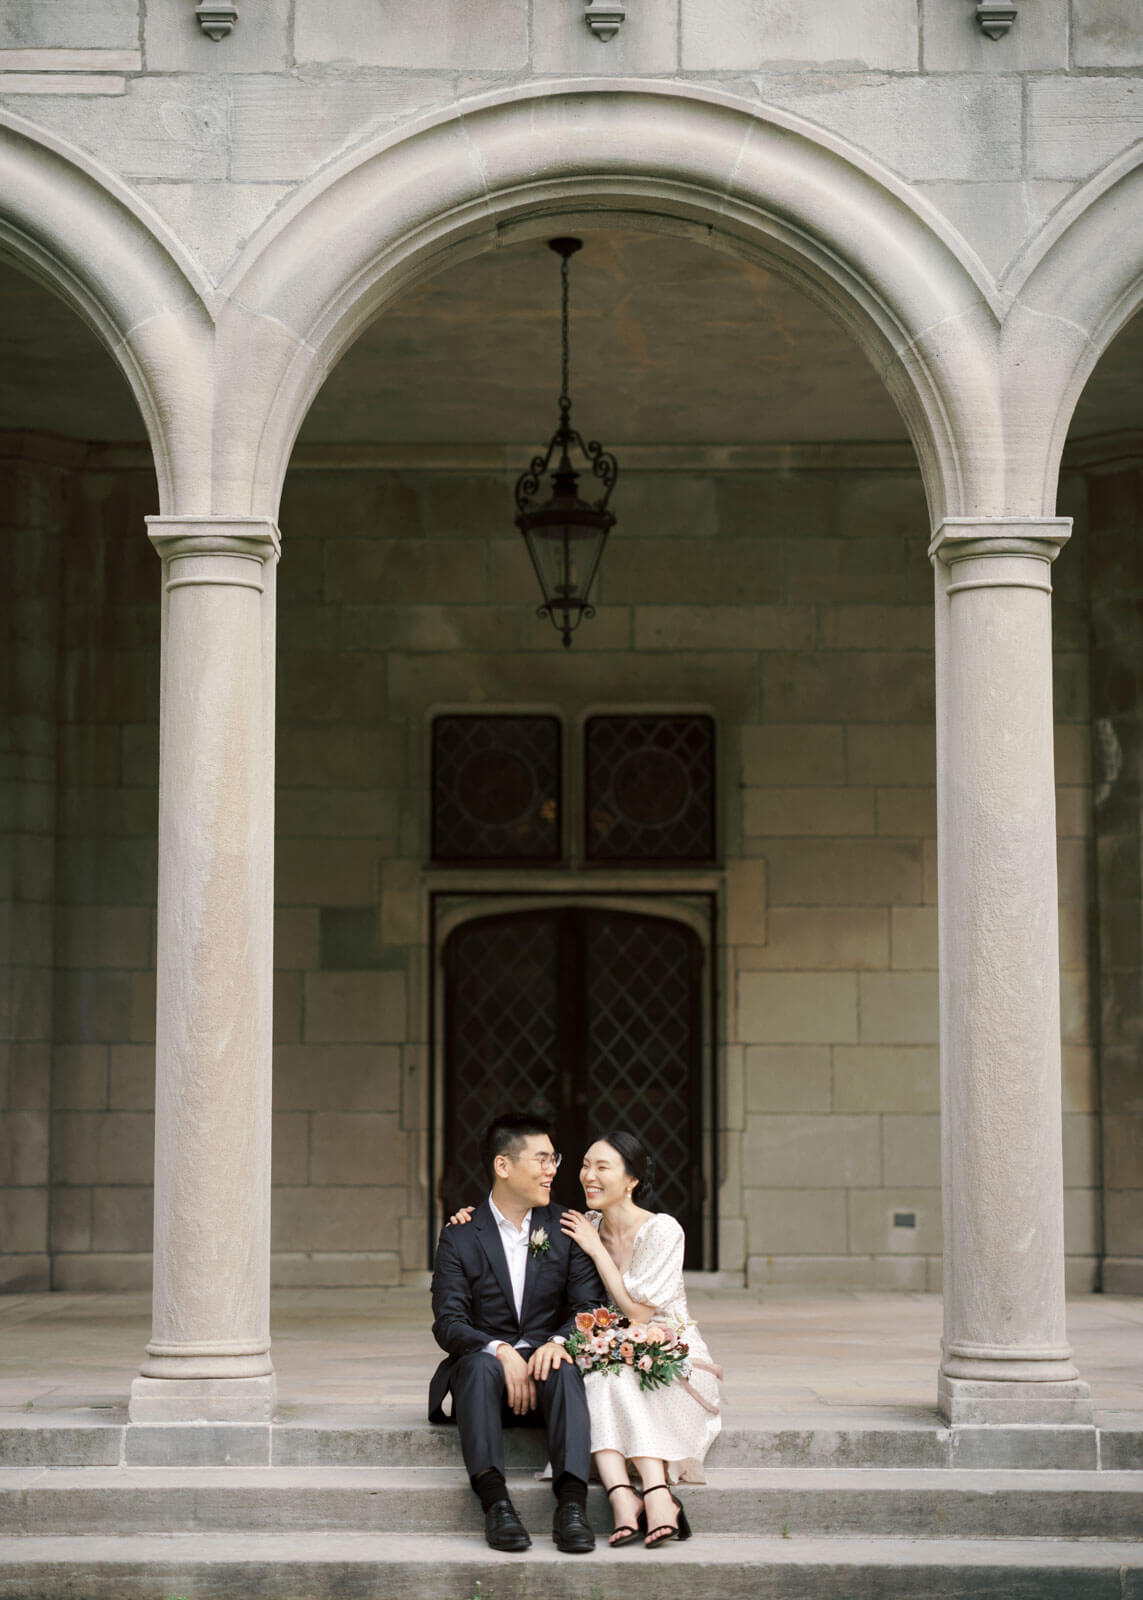 The bride and the groom are sitting on the entrance staircase in Planting Fields Arboretum, Oyster Bay, NY. Image by Jenny Fu Studio